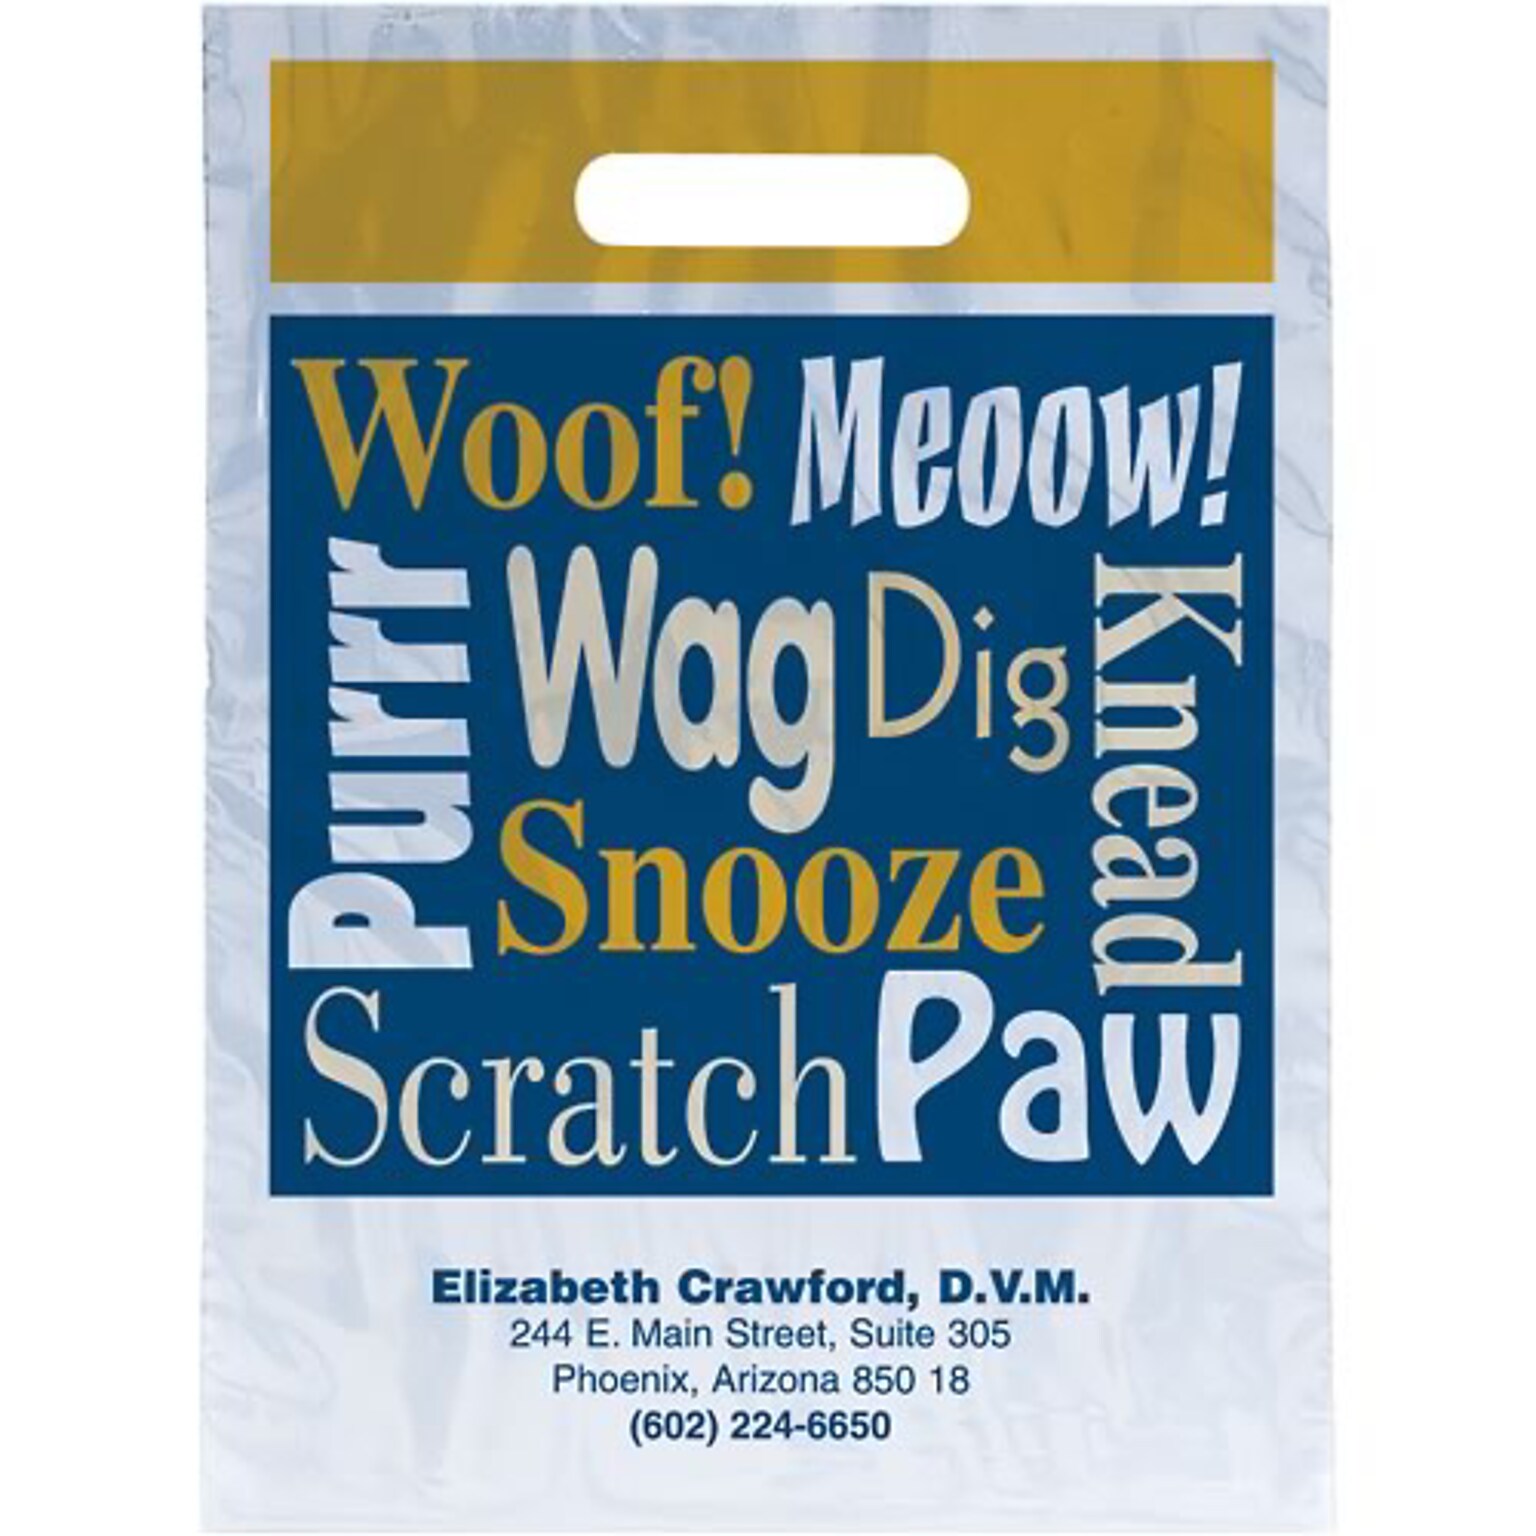 Medical Arts Press® Veterinary Personalized Large 2-Color Supply Bags; 9 x 13, Dog/Cat Words, Woof! Meow!, 100 Bags, (55771)